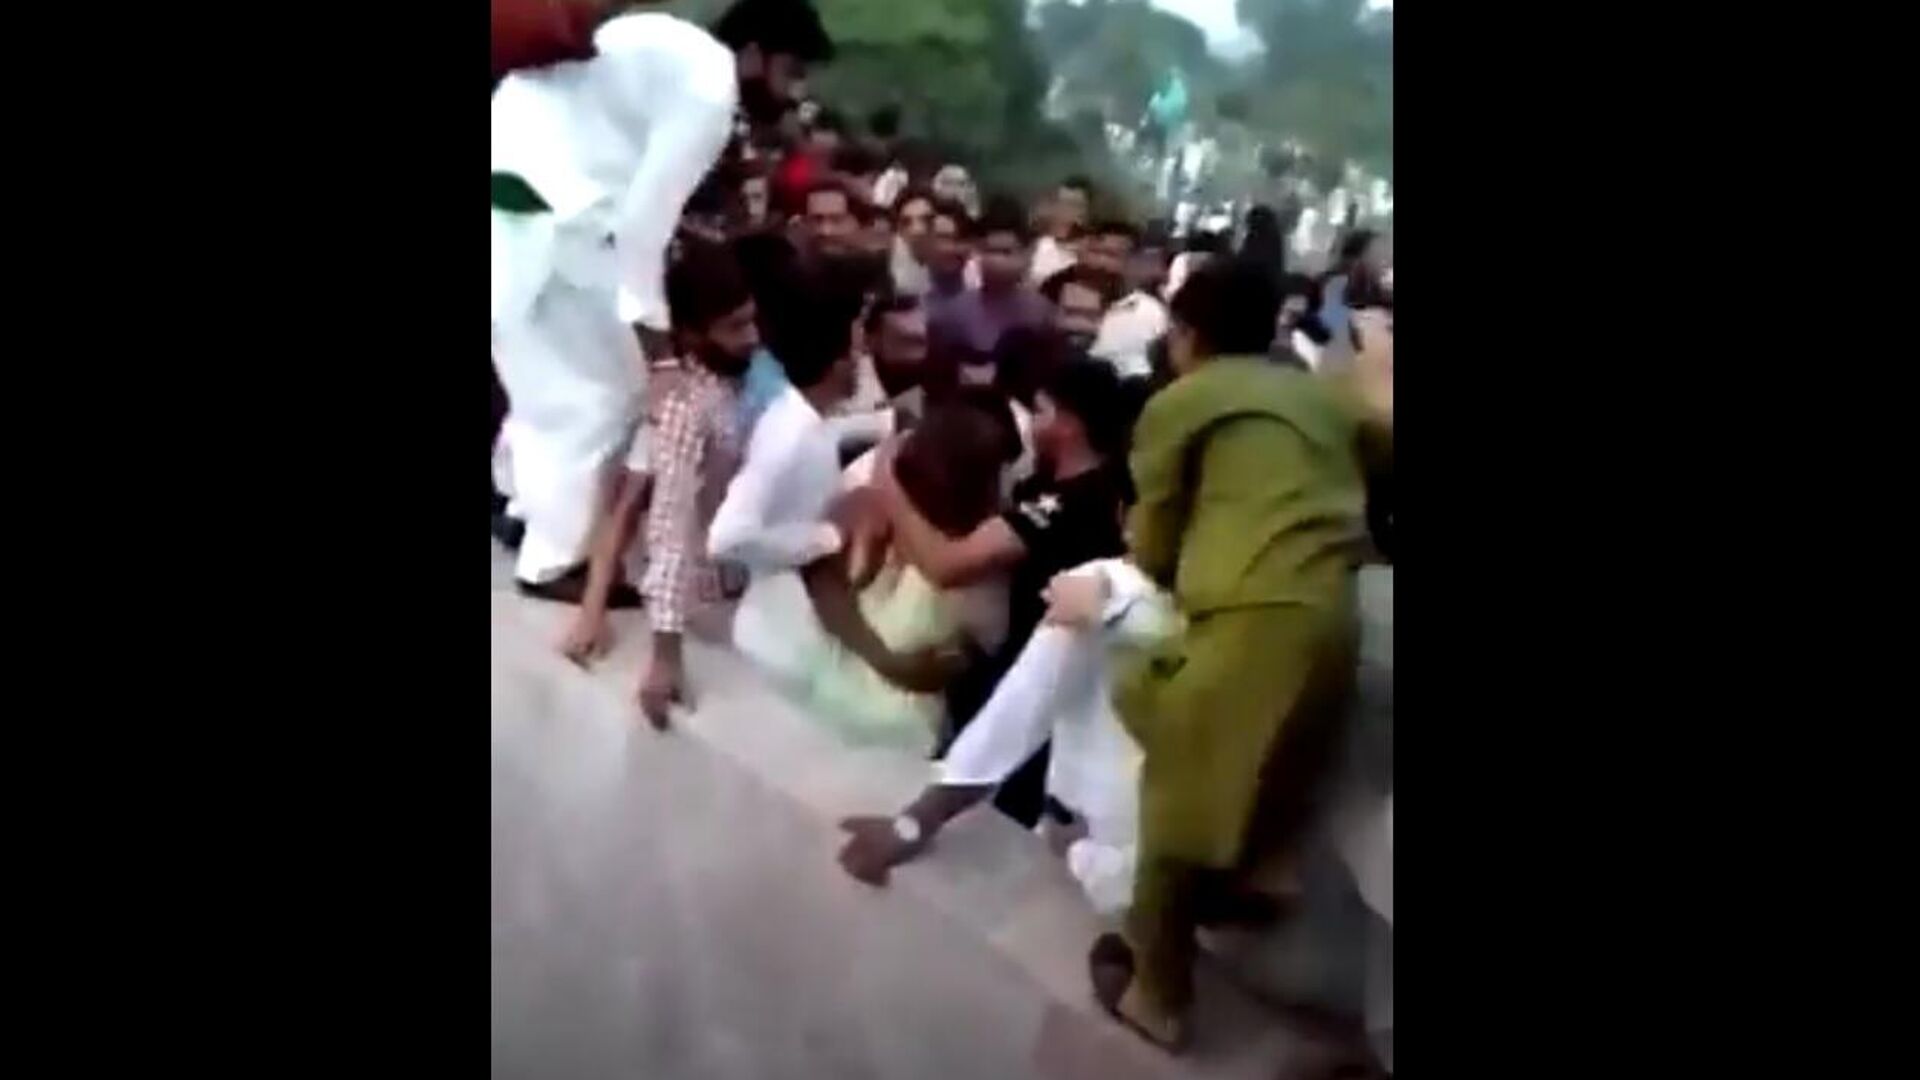 Mob molested Pakistani Youtuber during celebration of the 75th anniversaty of Pakistan's Independence Day  - Sputnik International, 1920, 07.09.2021